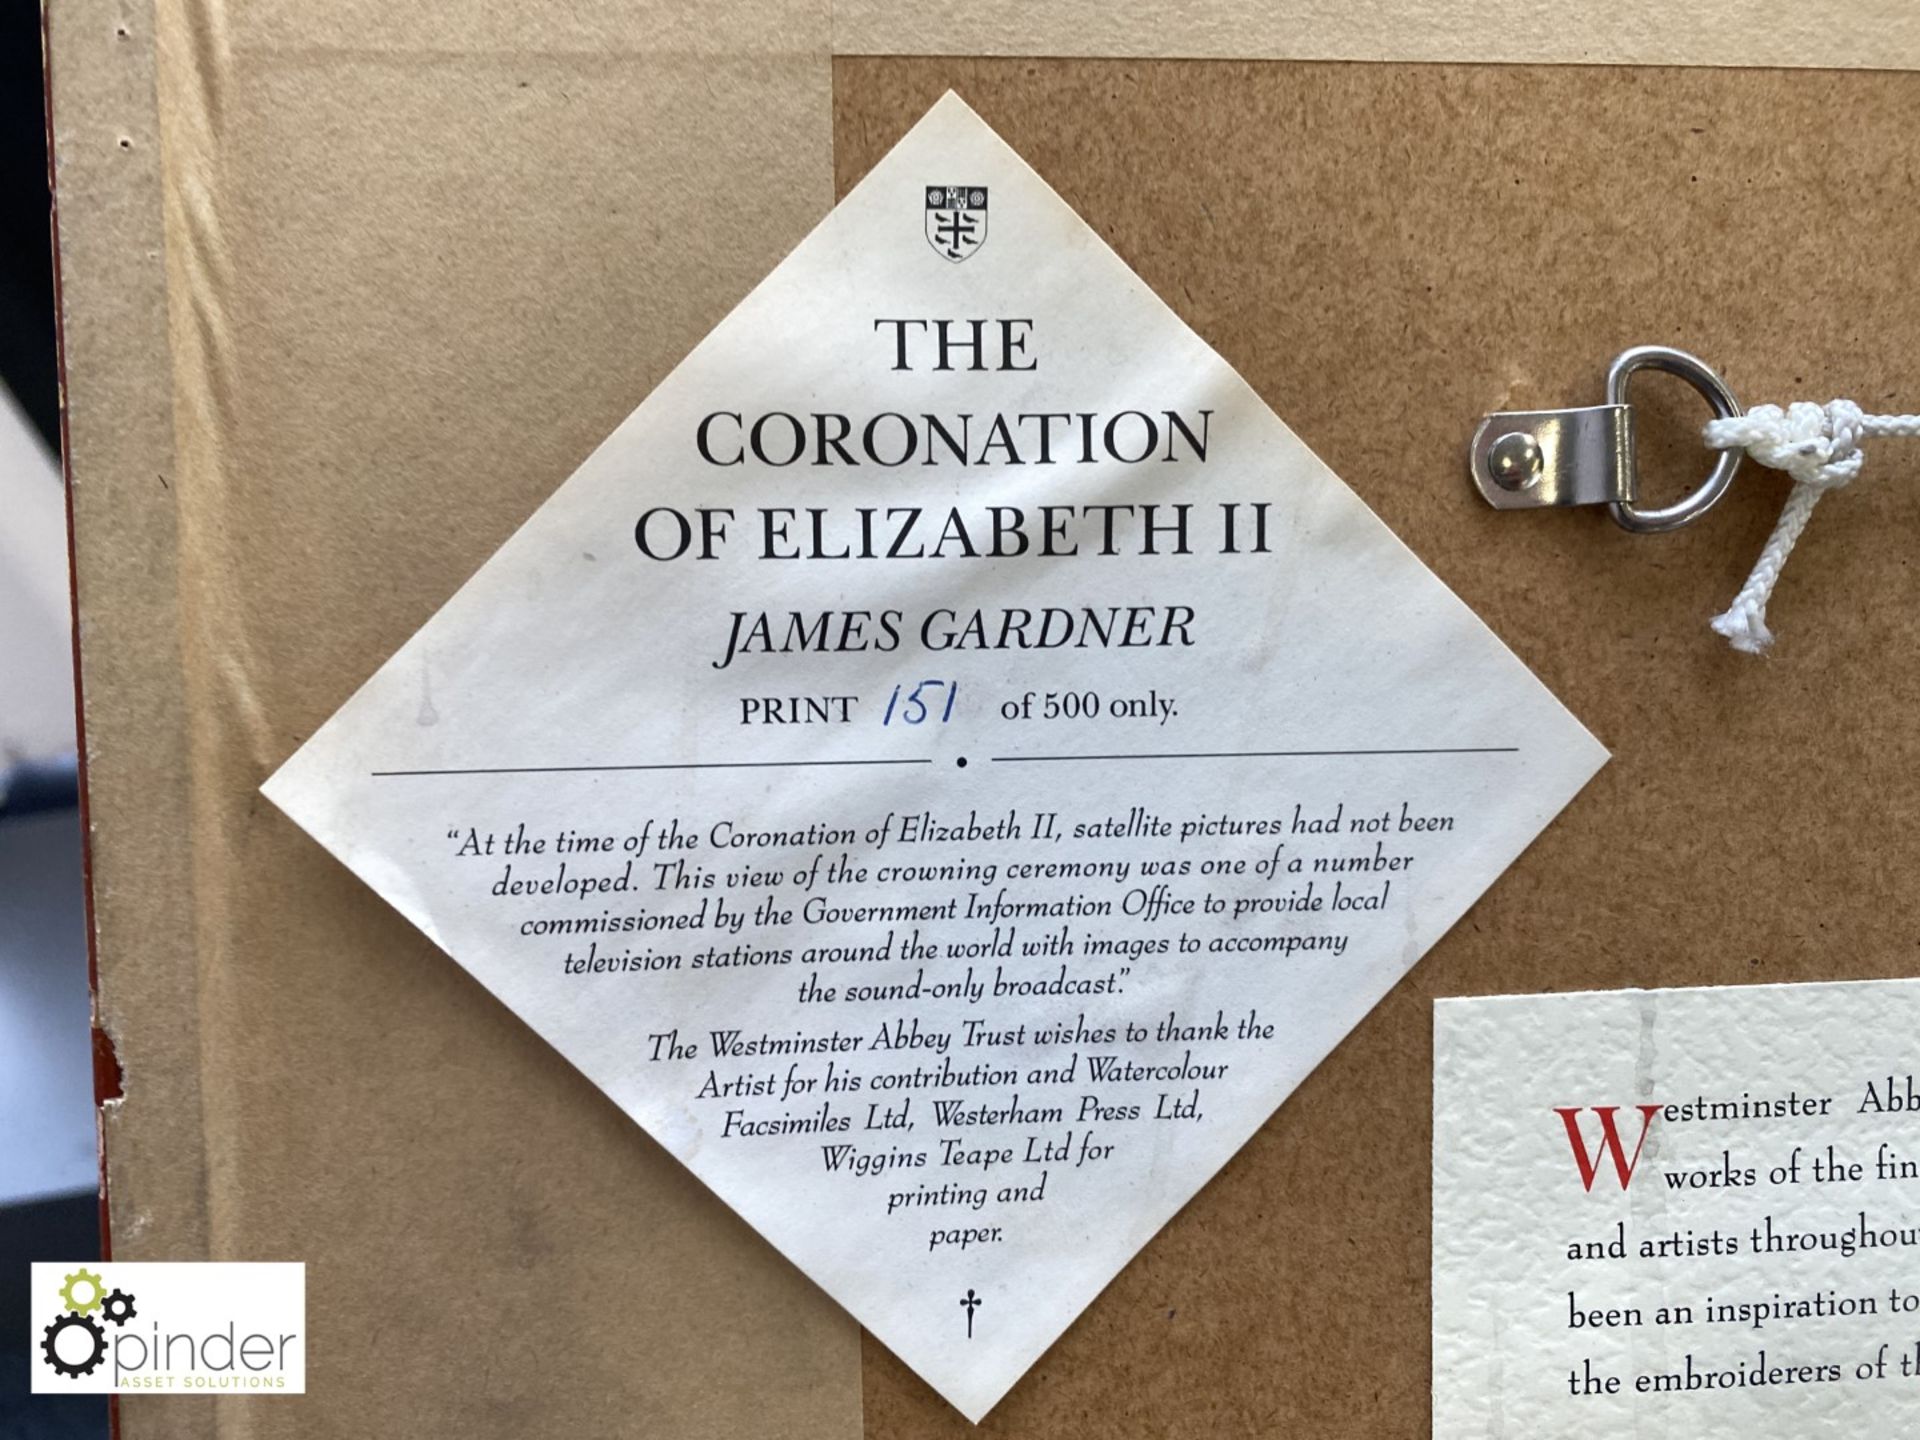 Framed and glazed signed limited edition Print of the Coronation of Elizabeth II, by James Gardener, - Image 3 of 3